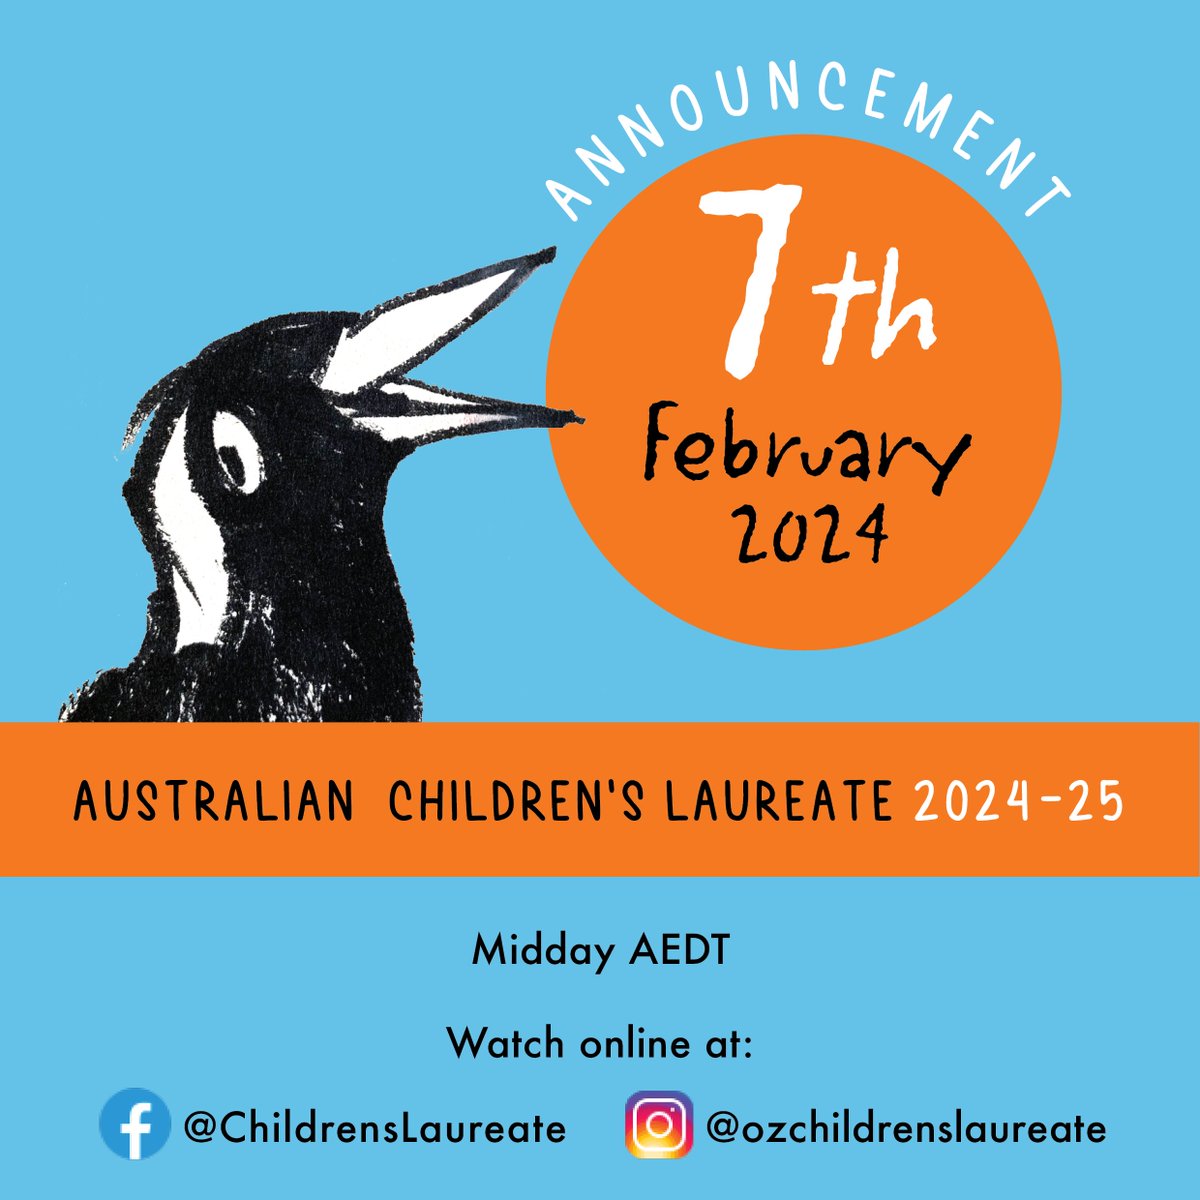 ⏰ ONE DAY TO GO ... ANNOUNCING THE 2024–25 AUSTRALIAN CHILDREN'S LAUREATE Who will it be? Find out 📷 12pm AEDT on 7 February 2024 (11am AEST/ 9am AWST/ 11.30am ACDT/ 10.30am ACST). @ALIANational @TheCBCA @aslanational @creative_gov_au @CopyrightAgency #ozchildrenslaureate